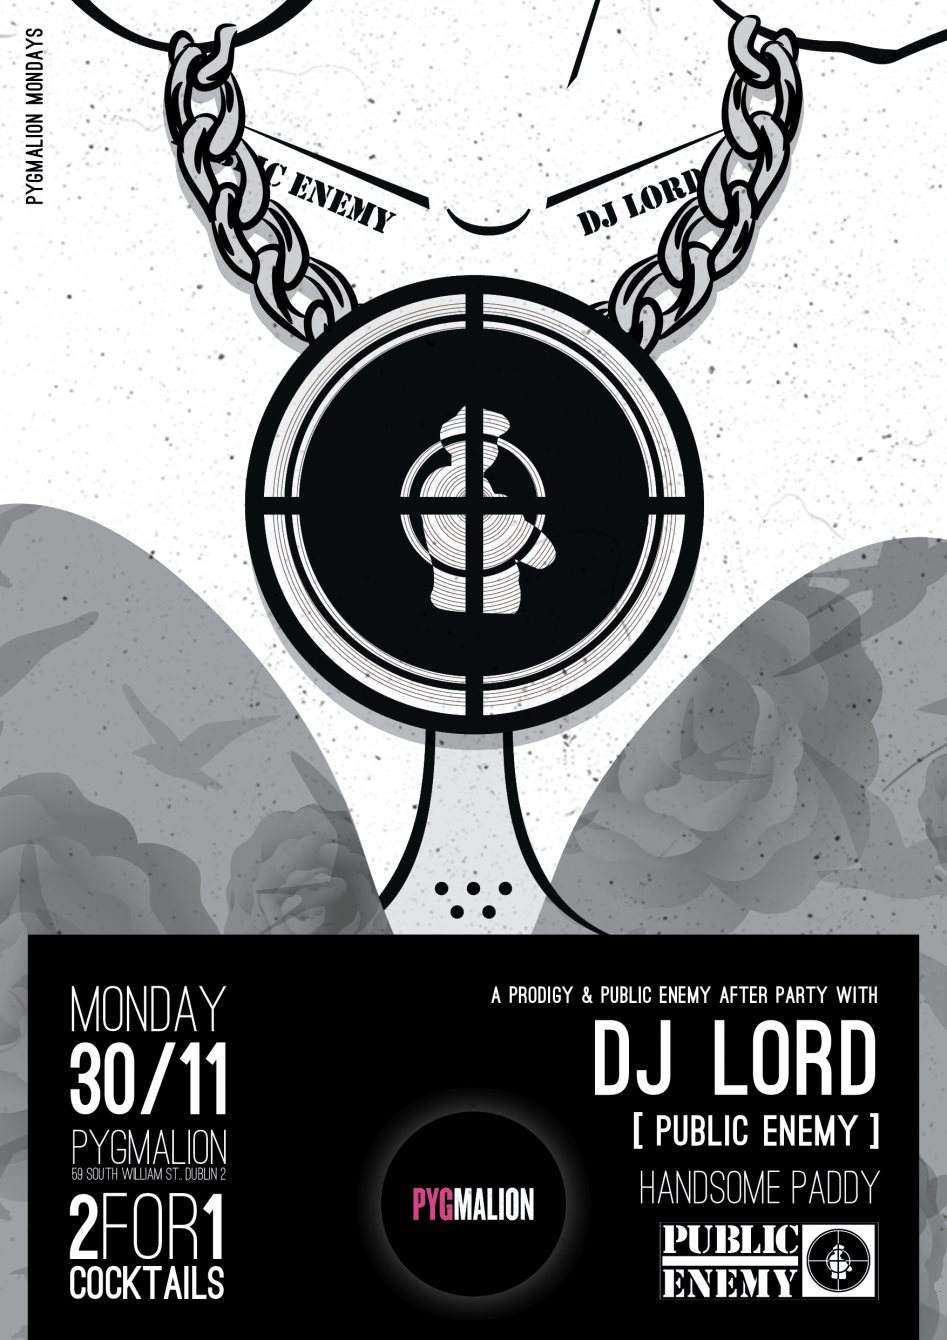 Prodigy/Public Enemy After Party with Dj Lord - Flyer back